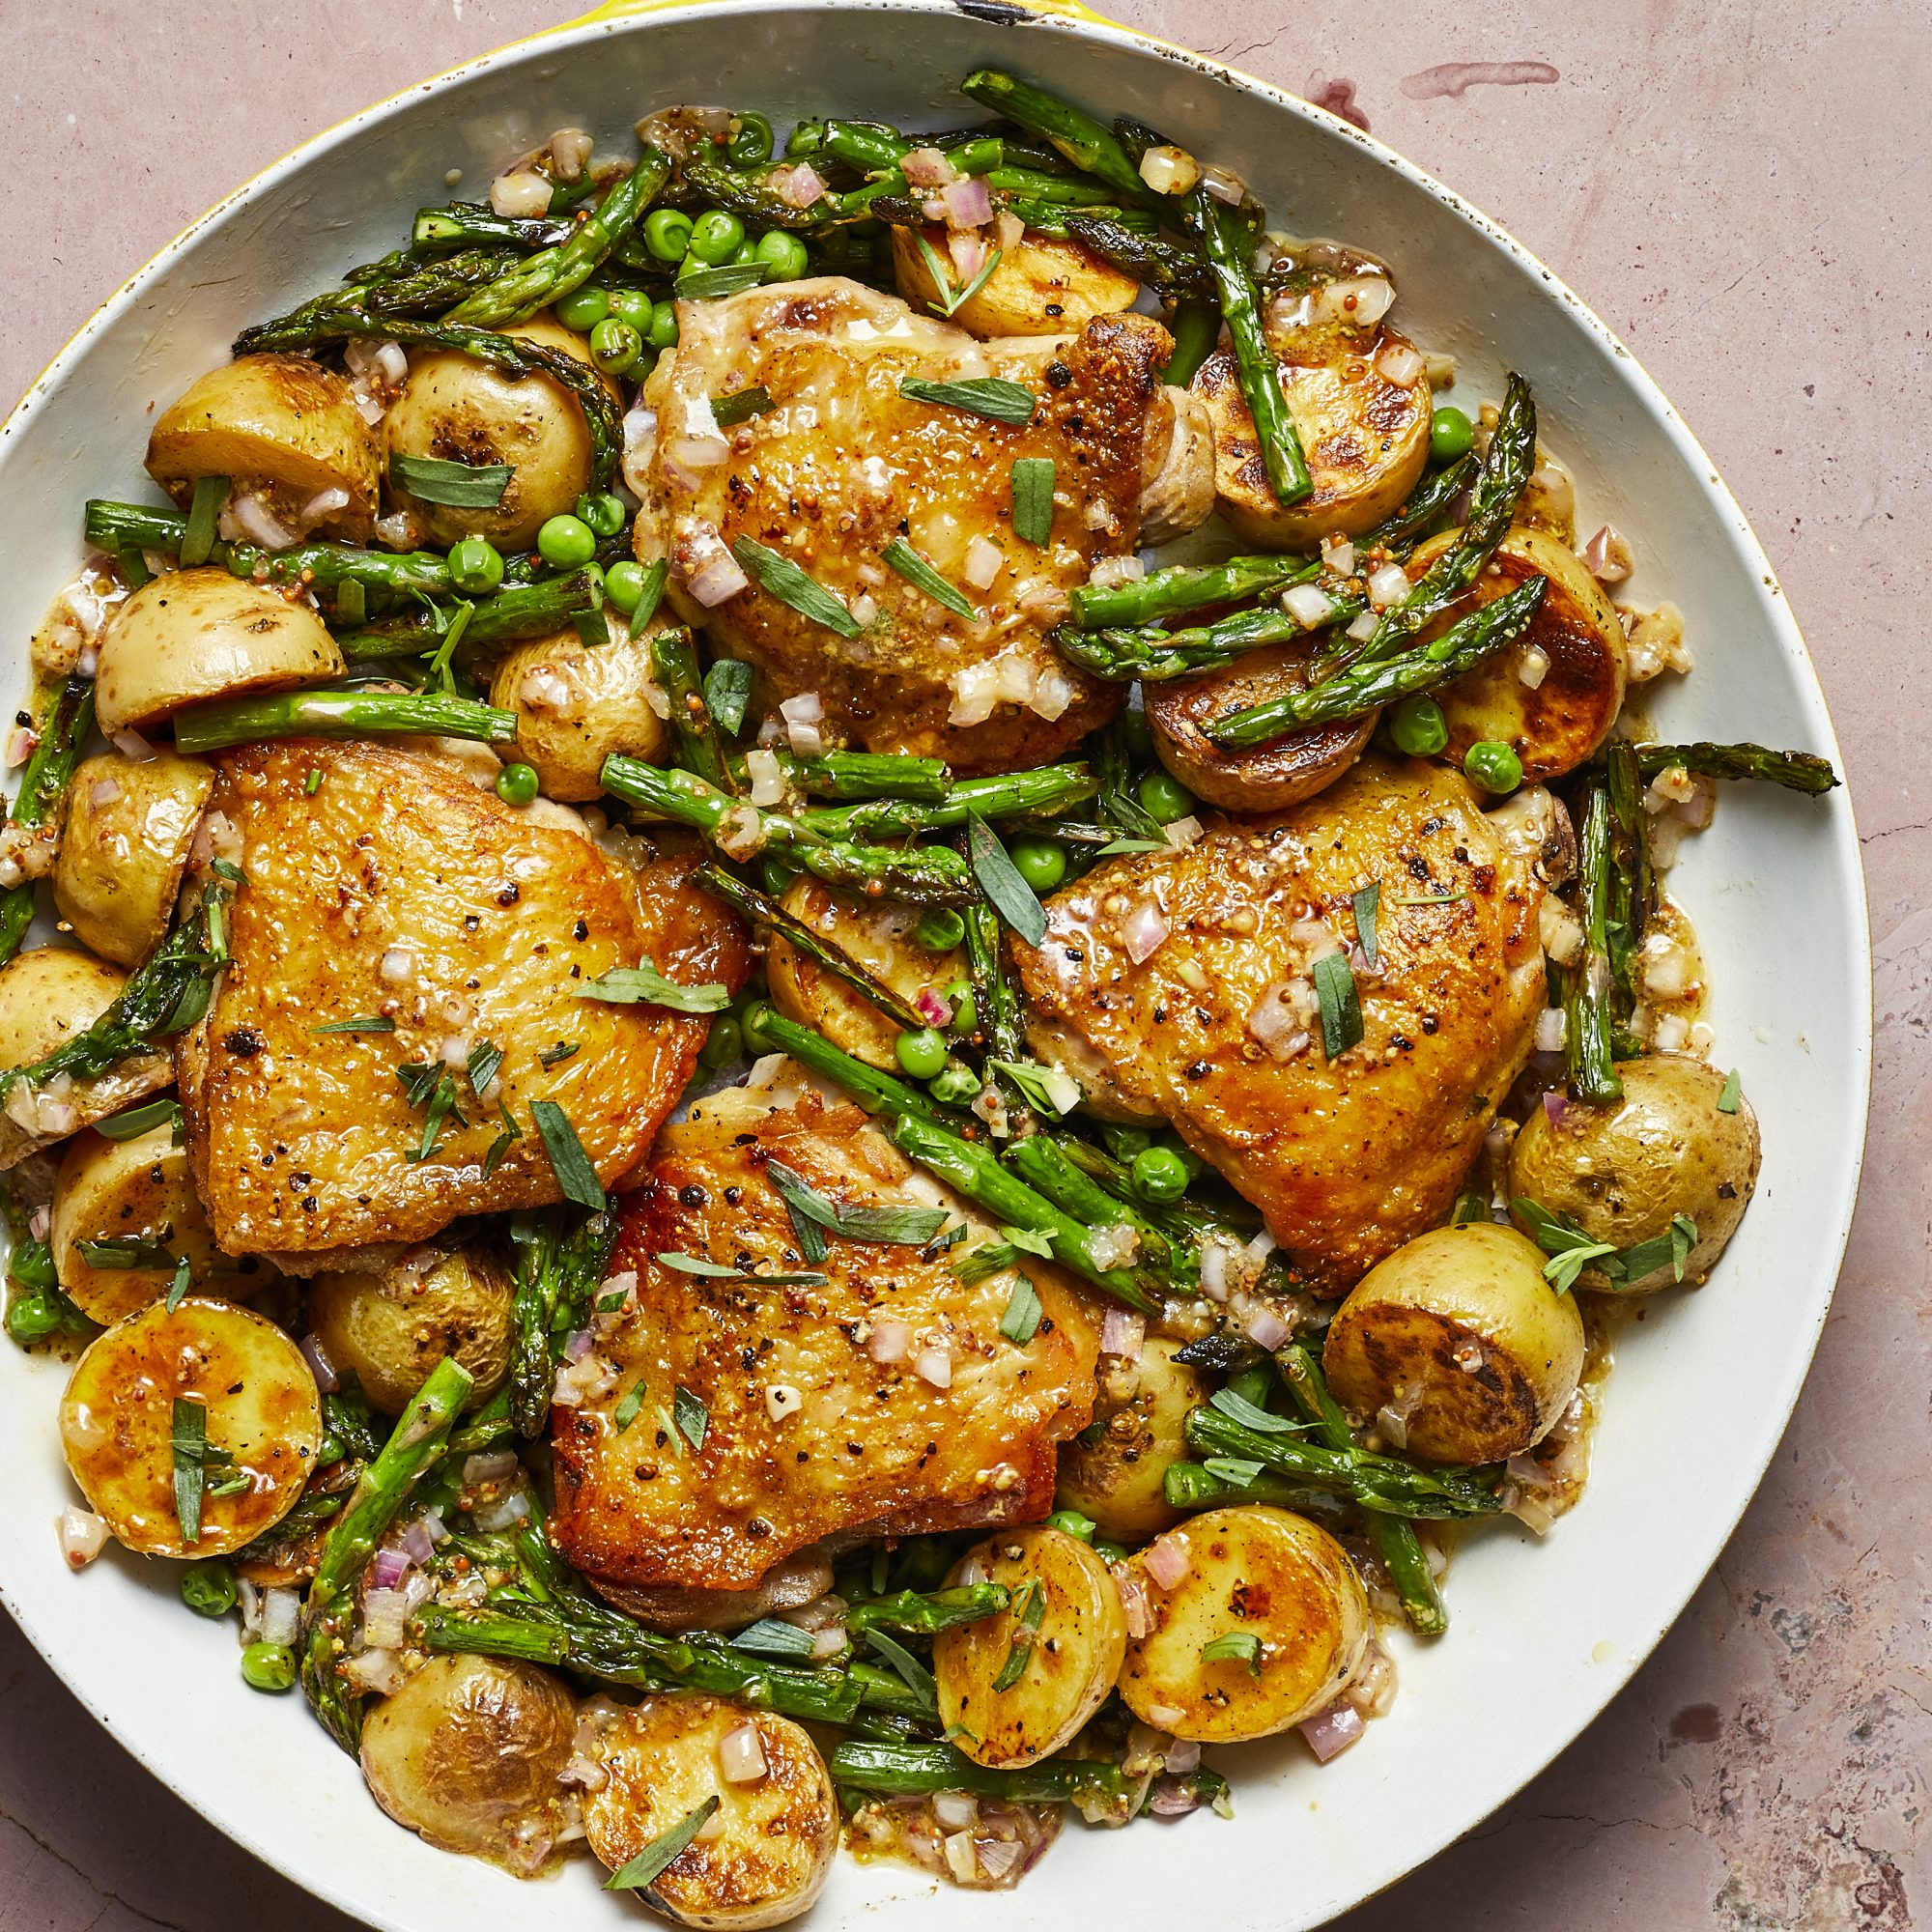 Healthy Weeknight Dinners For Two
 Chicken Dinners for Two